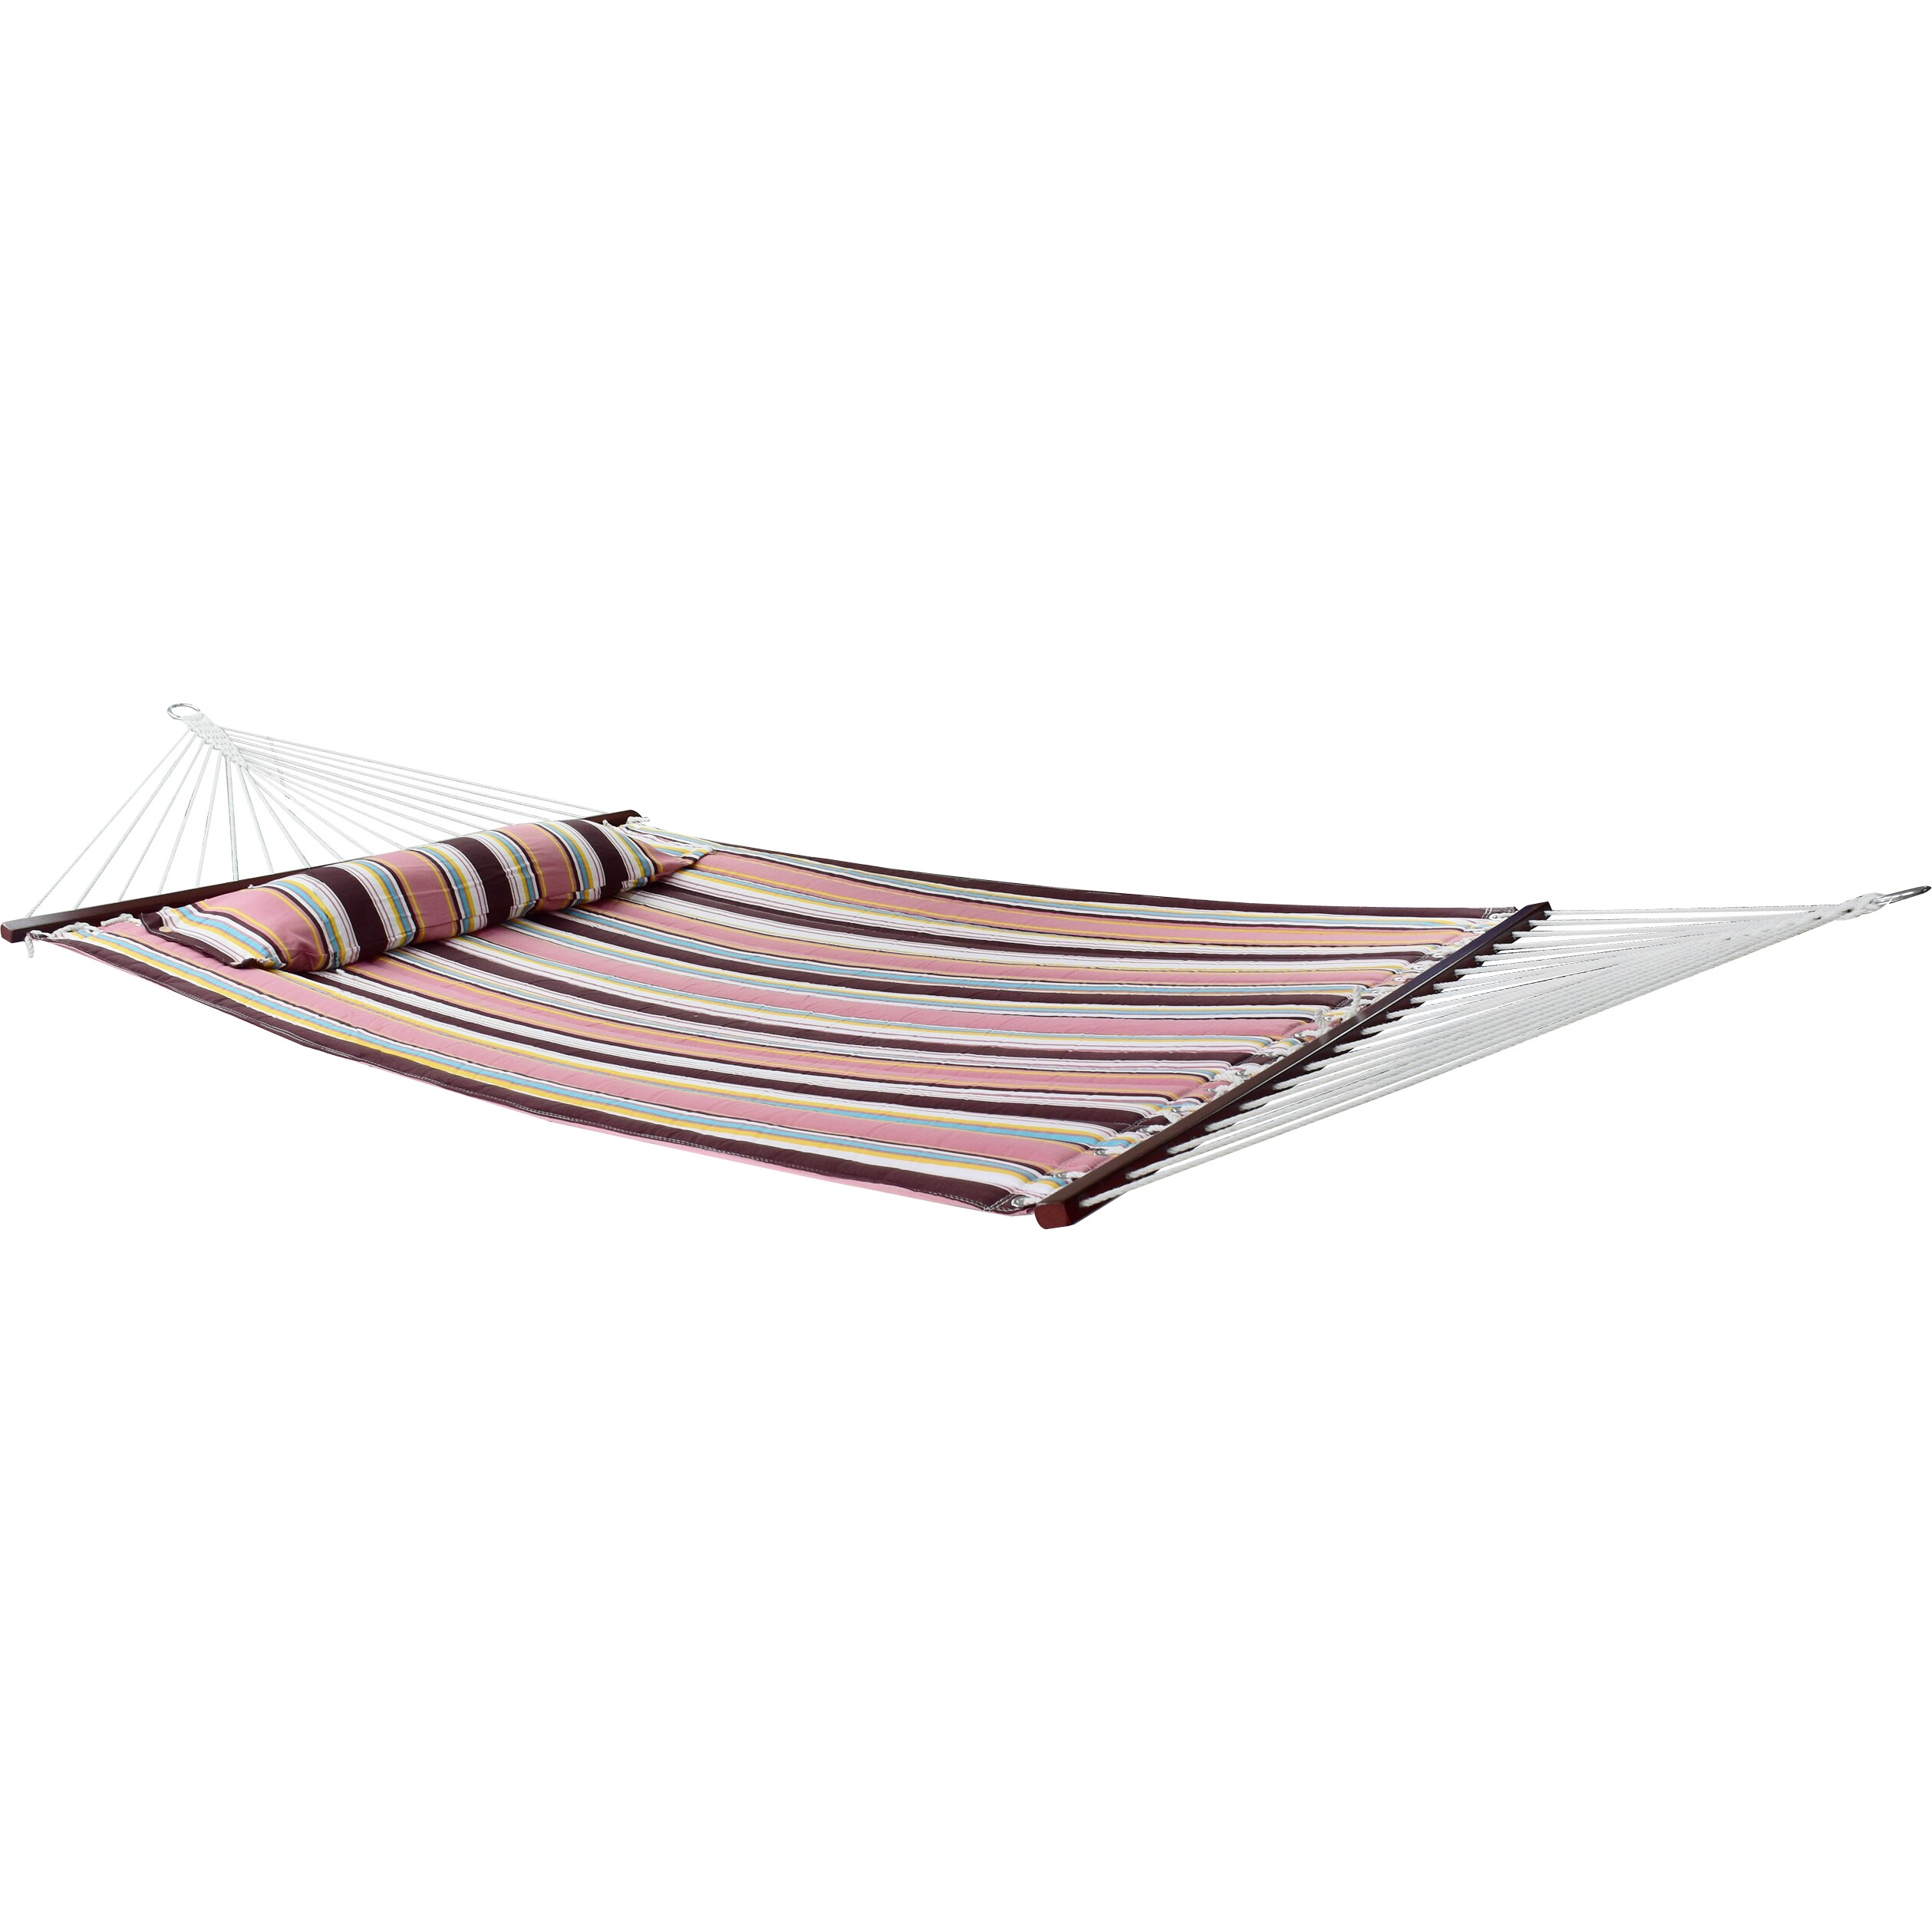 Stand Heavy Duty Mocha Sorbus Hammock with Spreader Bars and Detachable Pillow 